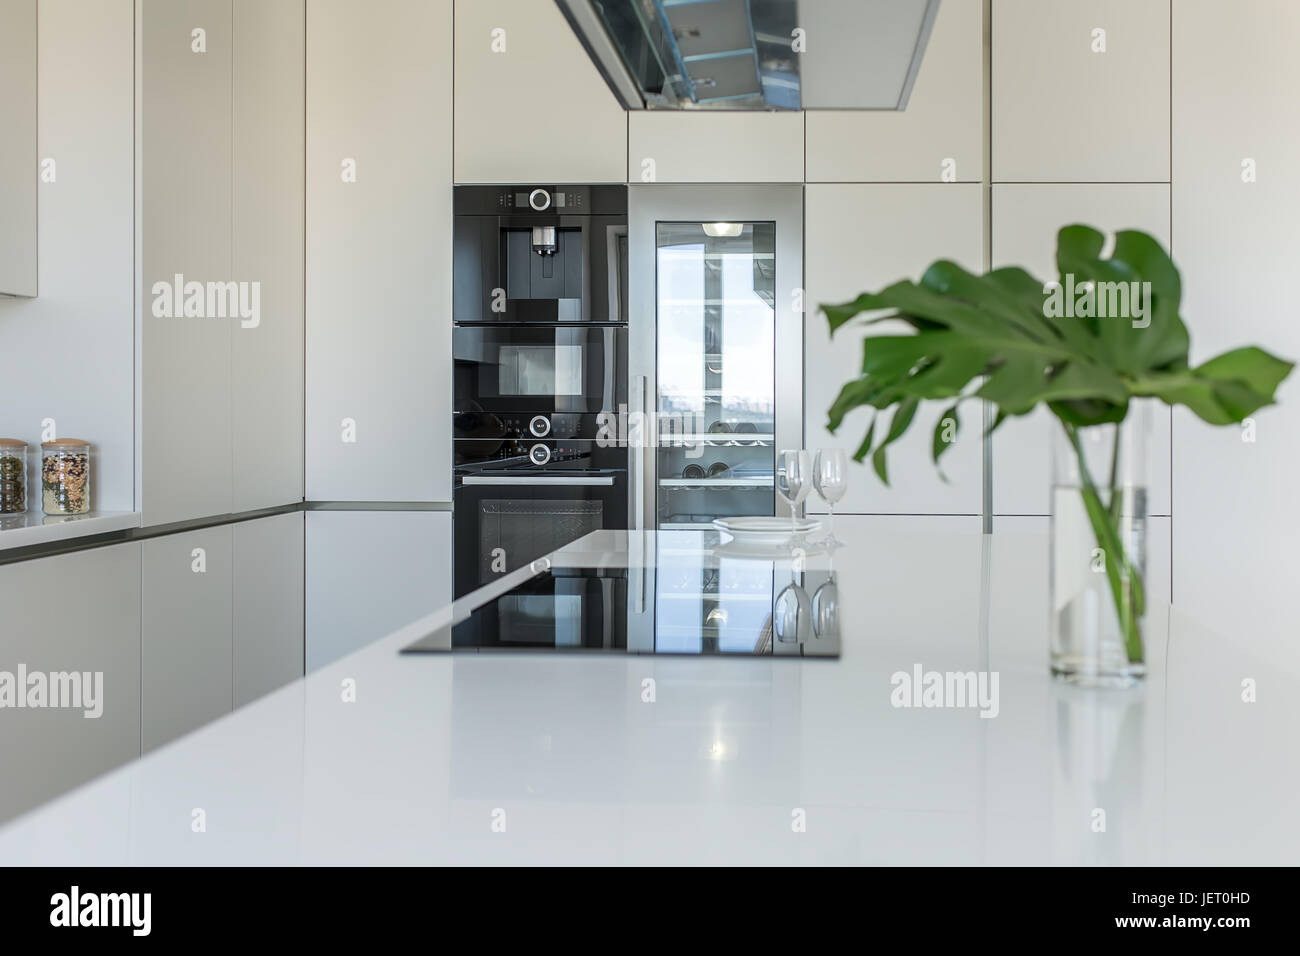 Modern kitchen with light walls. There is a white tabletop with a stove, plates, glasses, vase with green leaves. Behind it there are lockers with an  Stock Photo